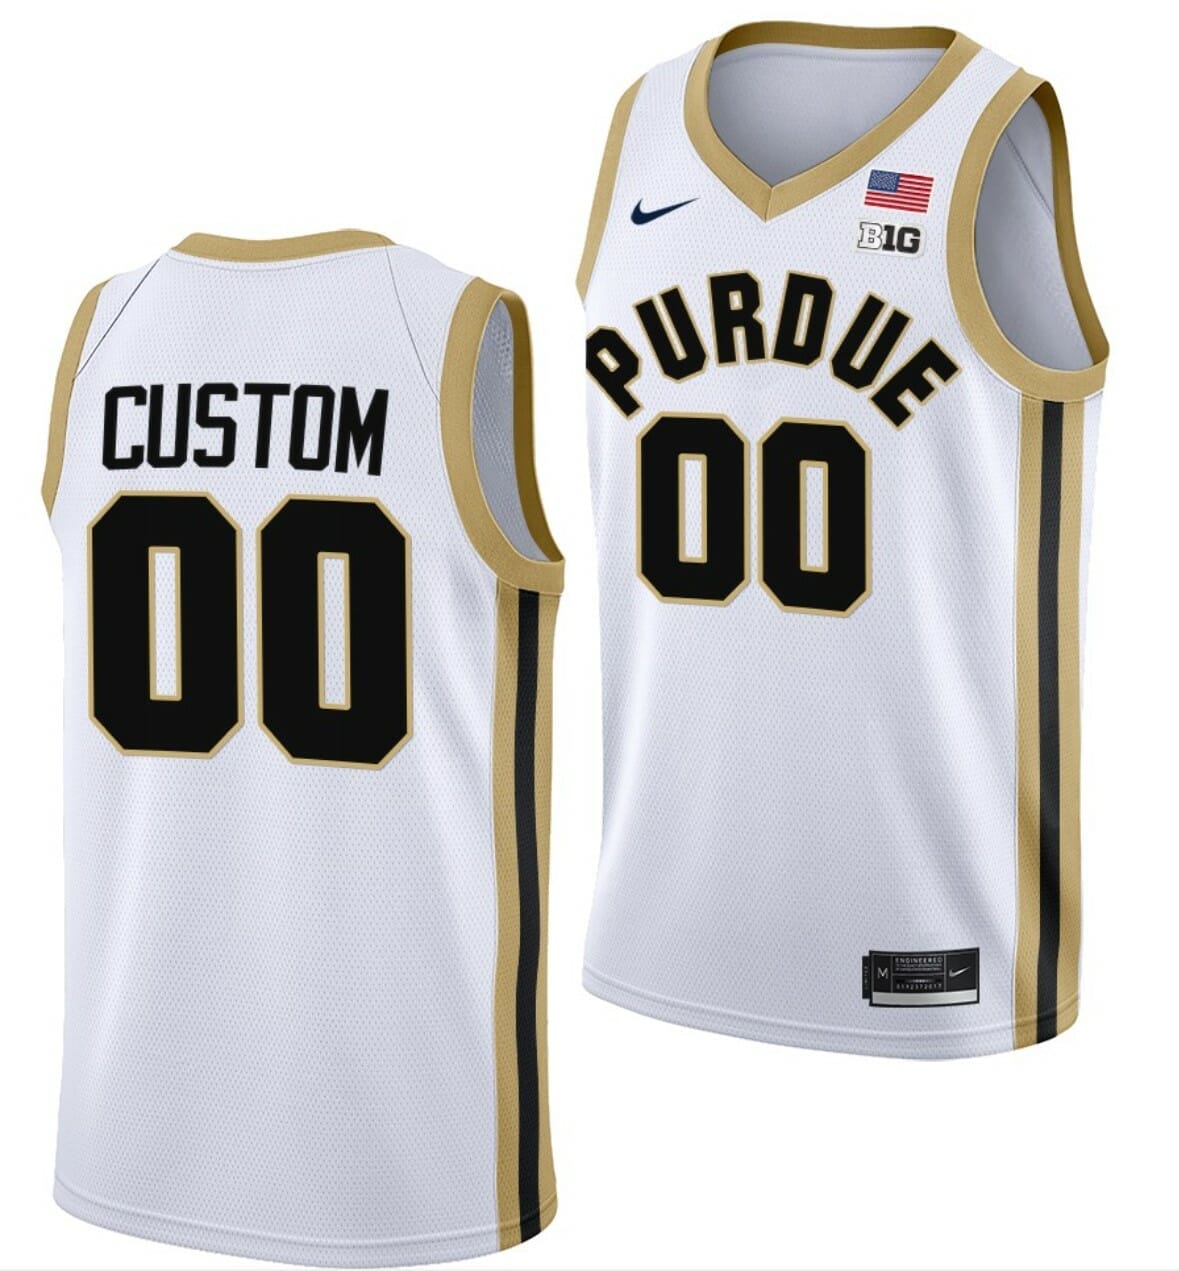 Purdue Boilermakers NCAA champions jersey